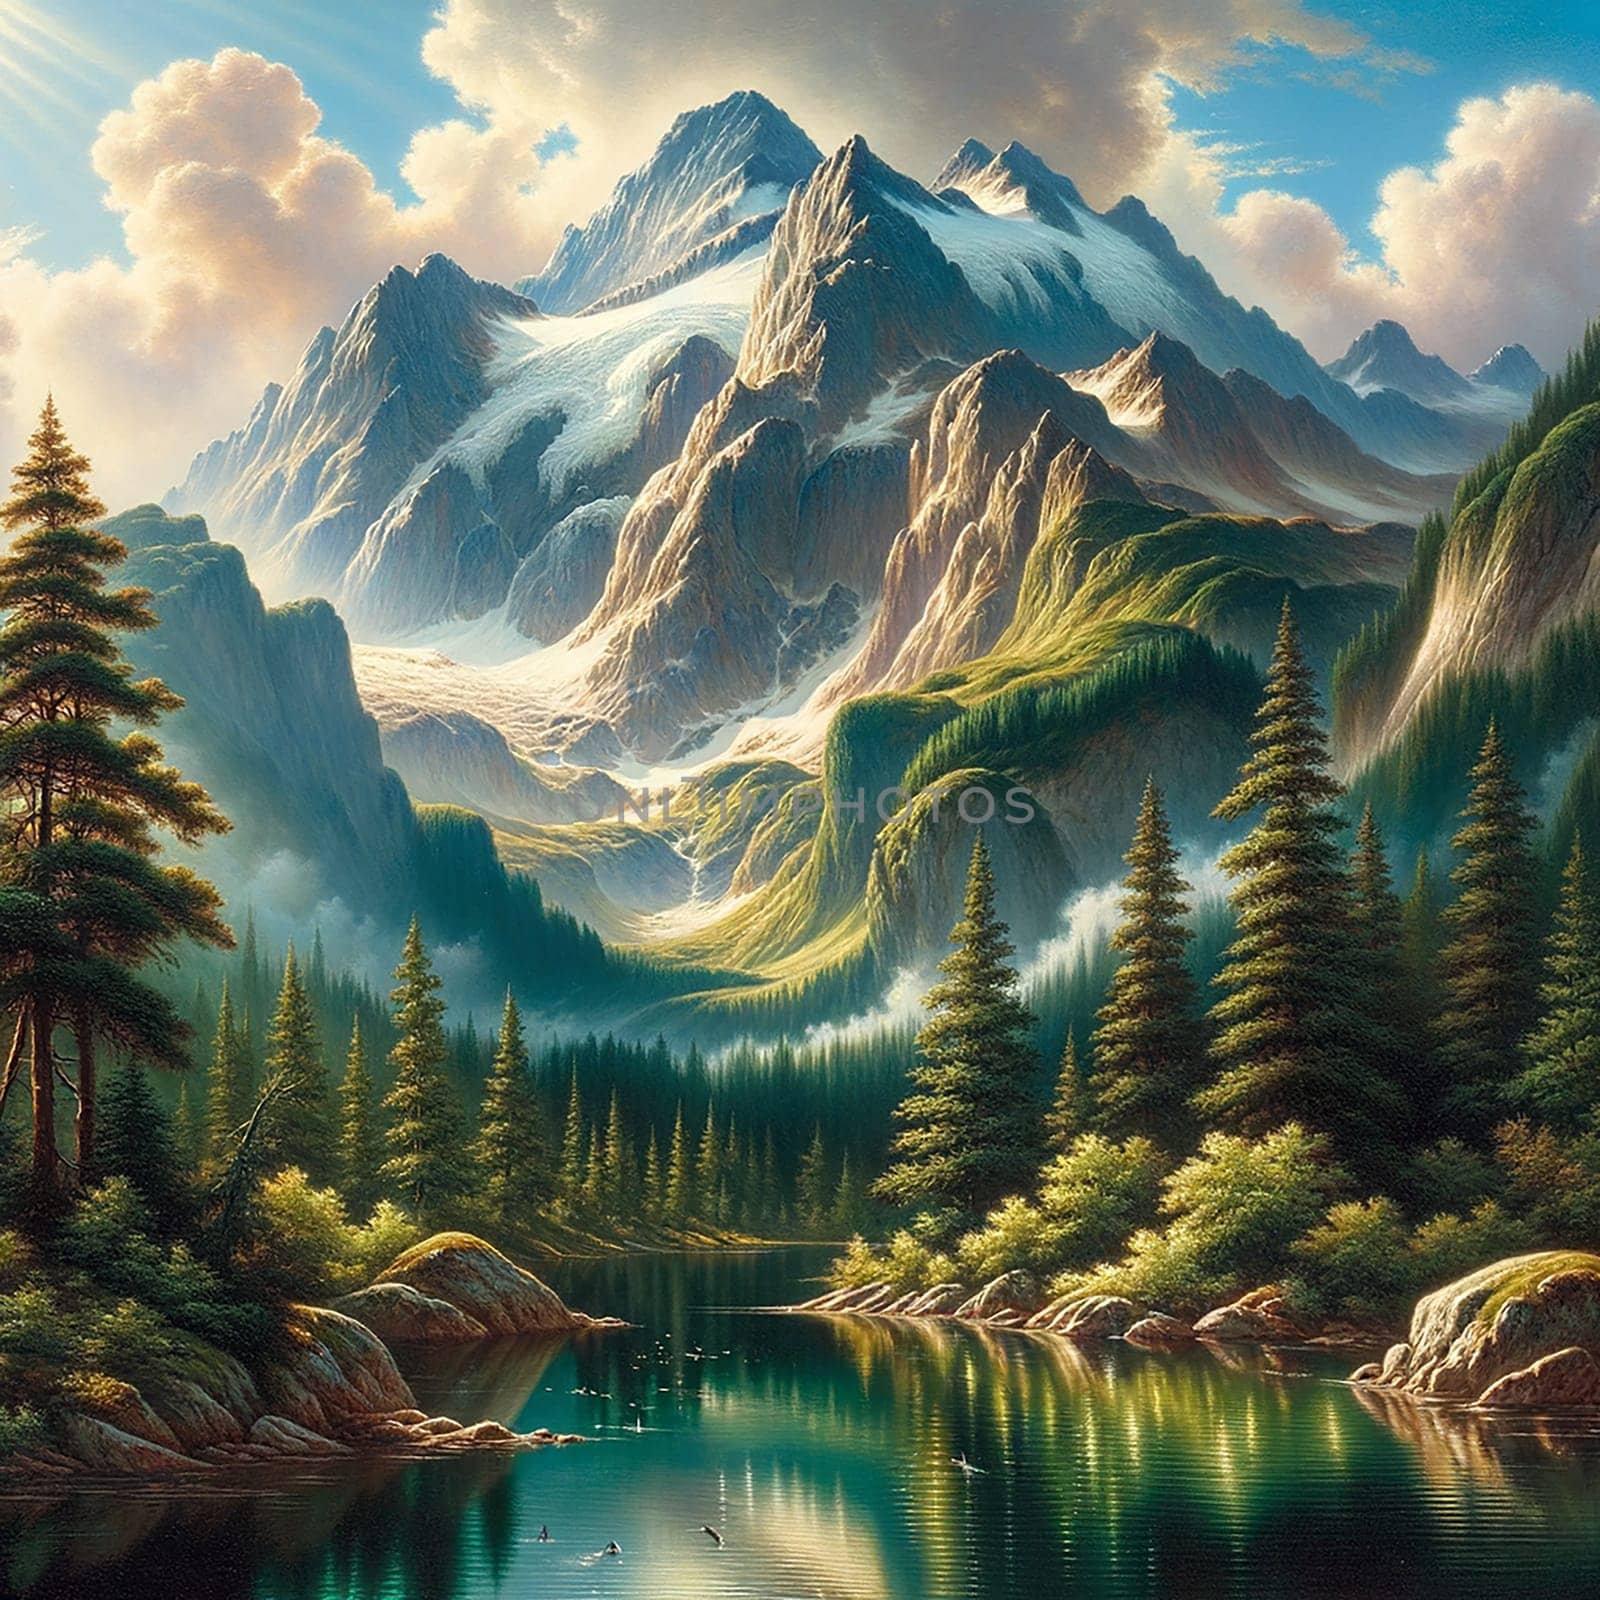 Mountain Lake Serenity: A Painting of Nature's Majesty by Petrichor